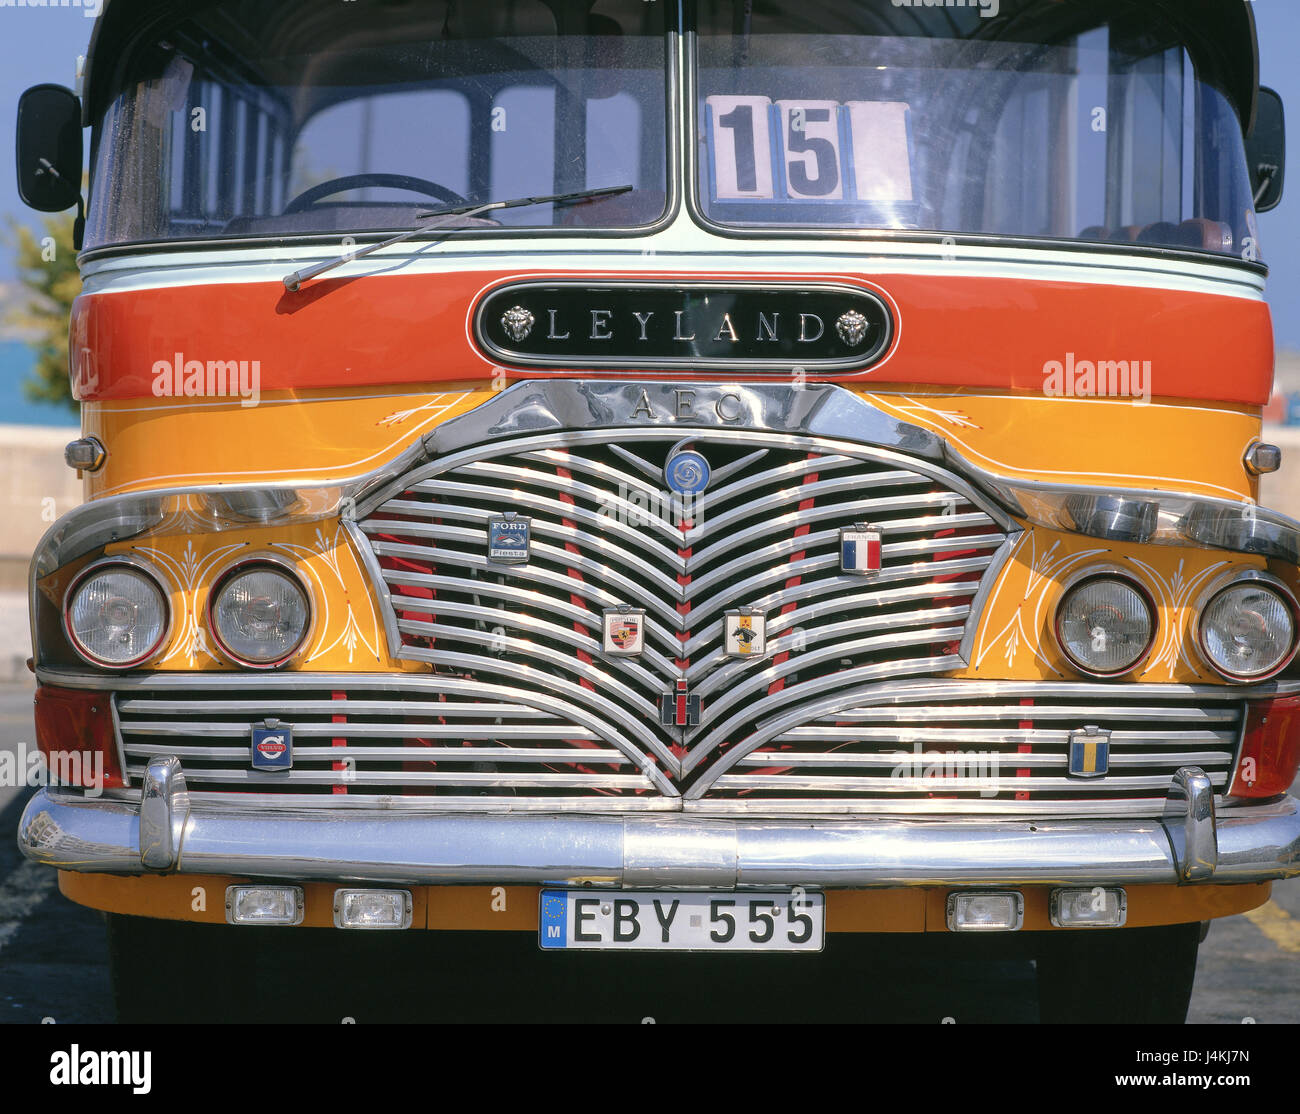 Island Malta, coach, Leyland, AEC, front view, detail island state, Mediterranean island, Maltese islands, bus, regular bus, public transit, publicly, vehicle, personal transport, means of transportation, passenger traffic, old-timer, typically, bonnet, windscreen, radiator grille Stock Photo